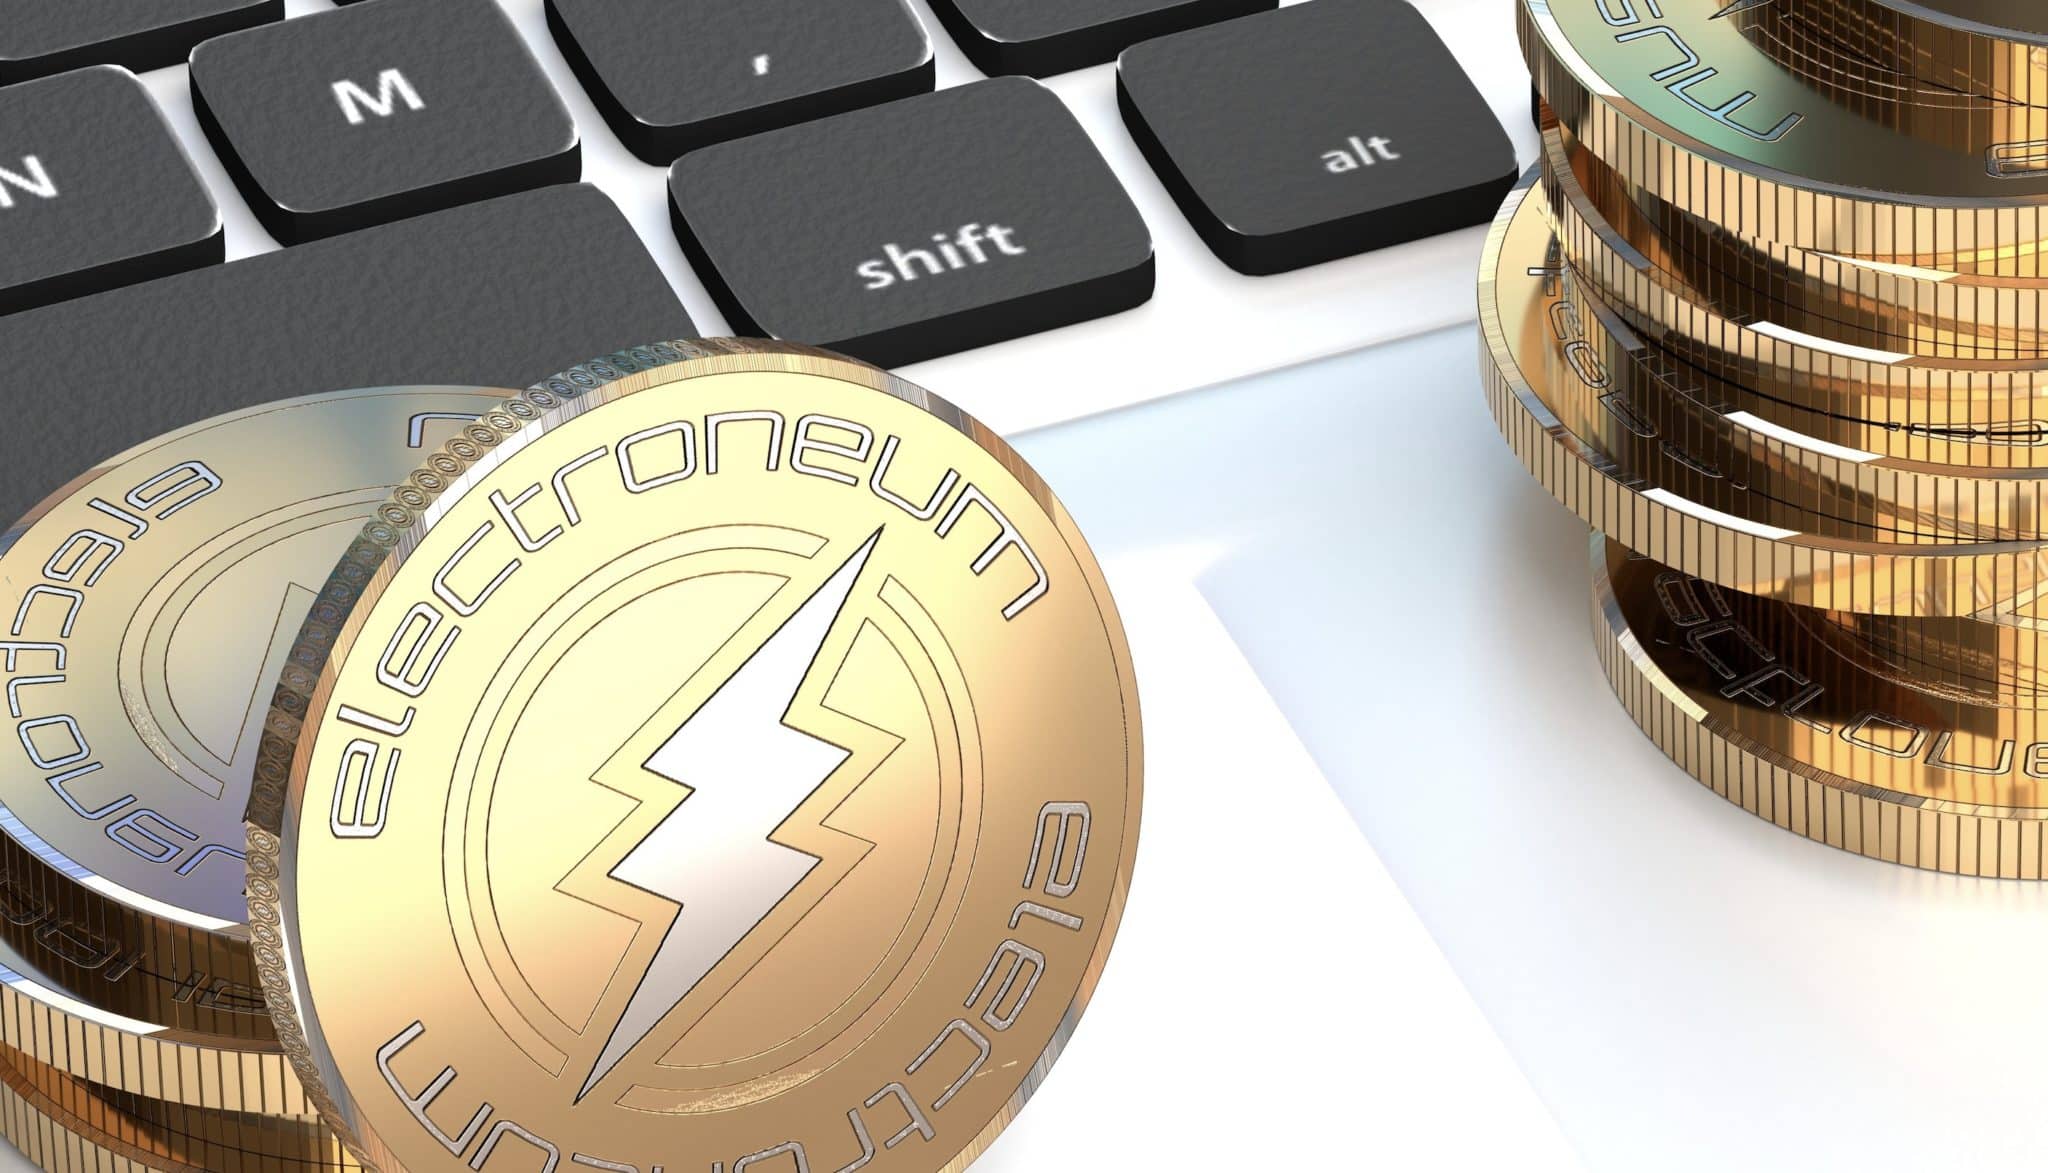 Electroneum (ETN): Fluctuating Valuation Sees Remarkable Hike